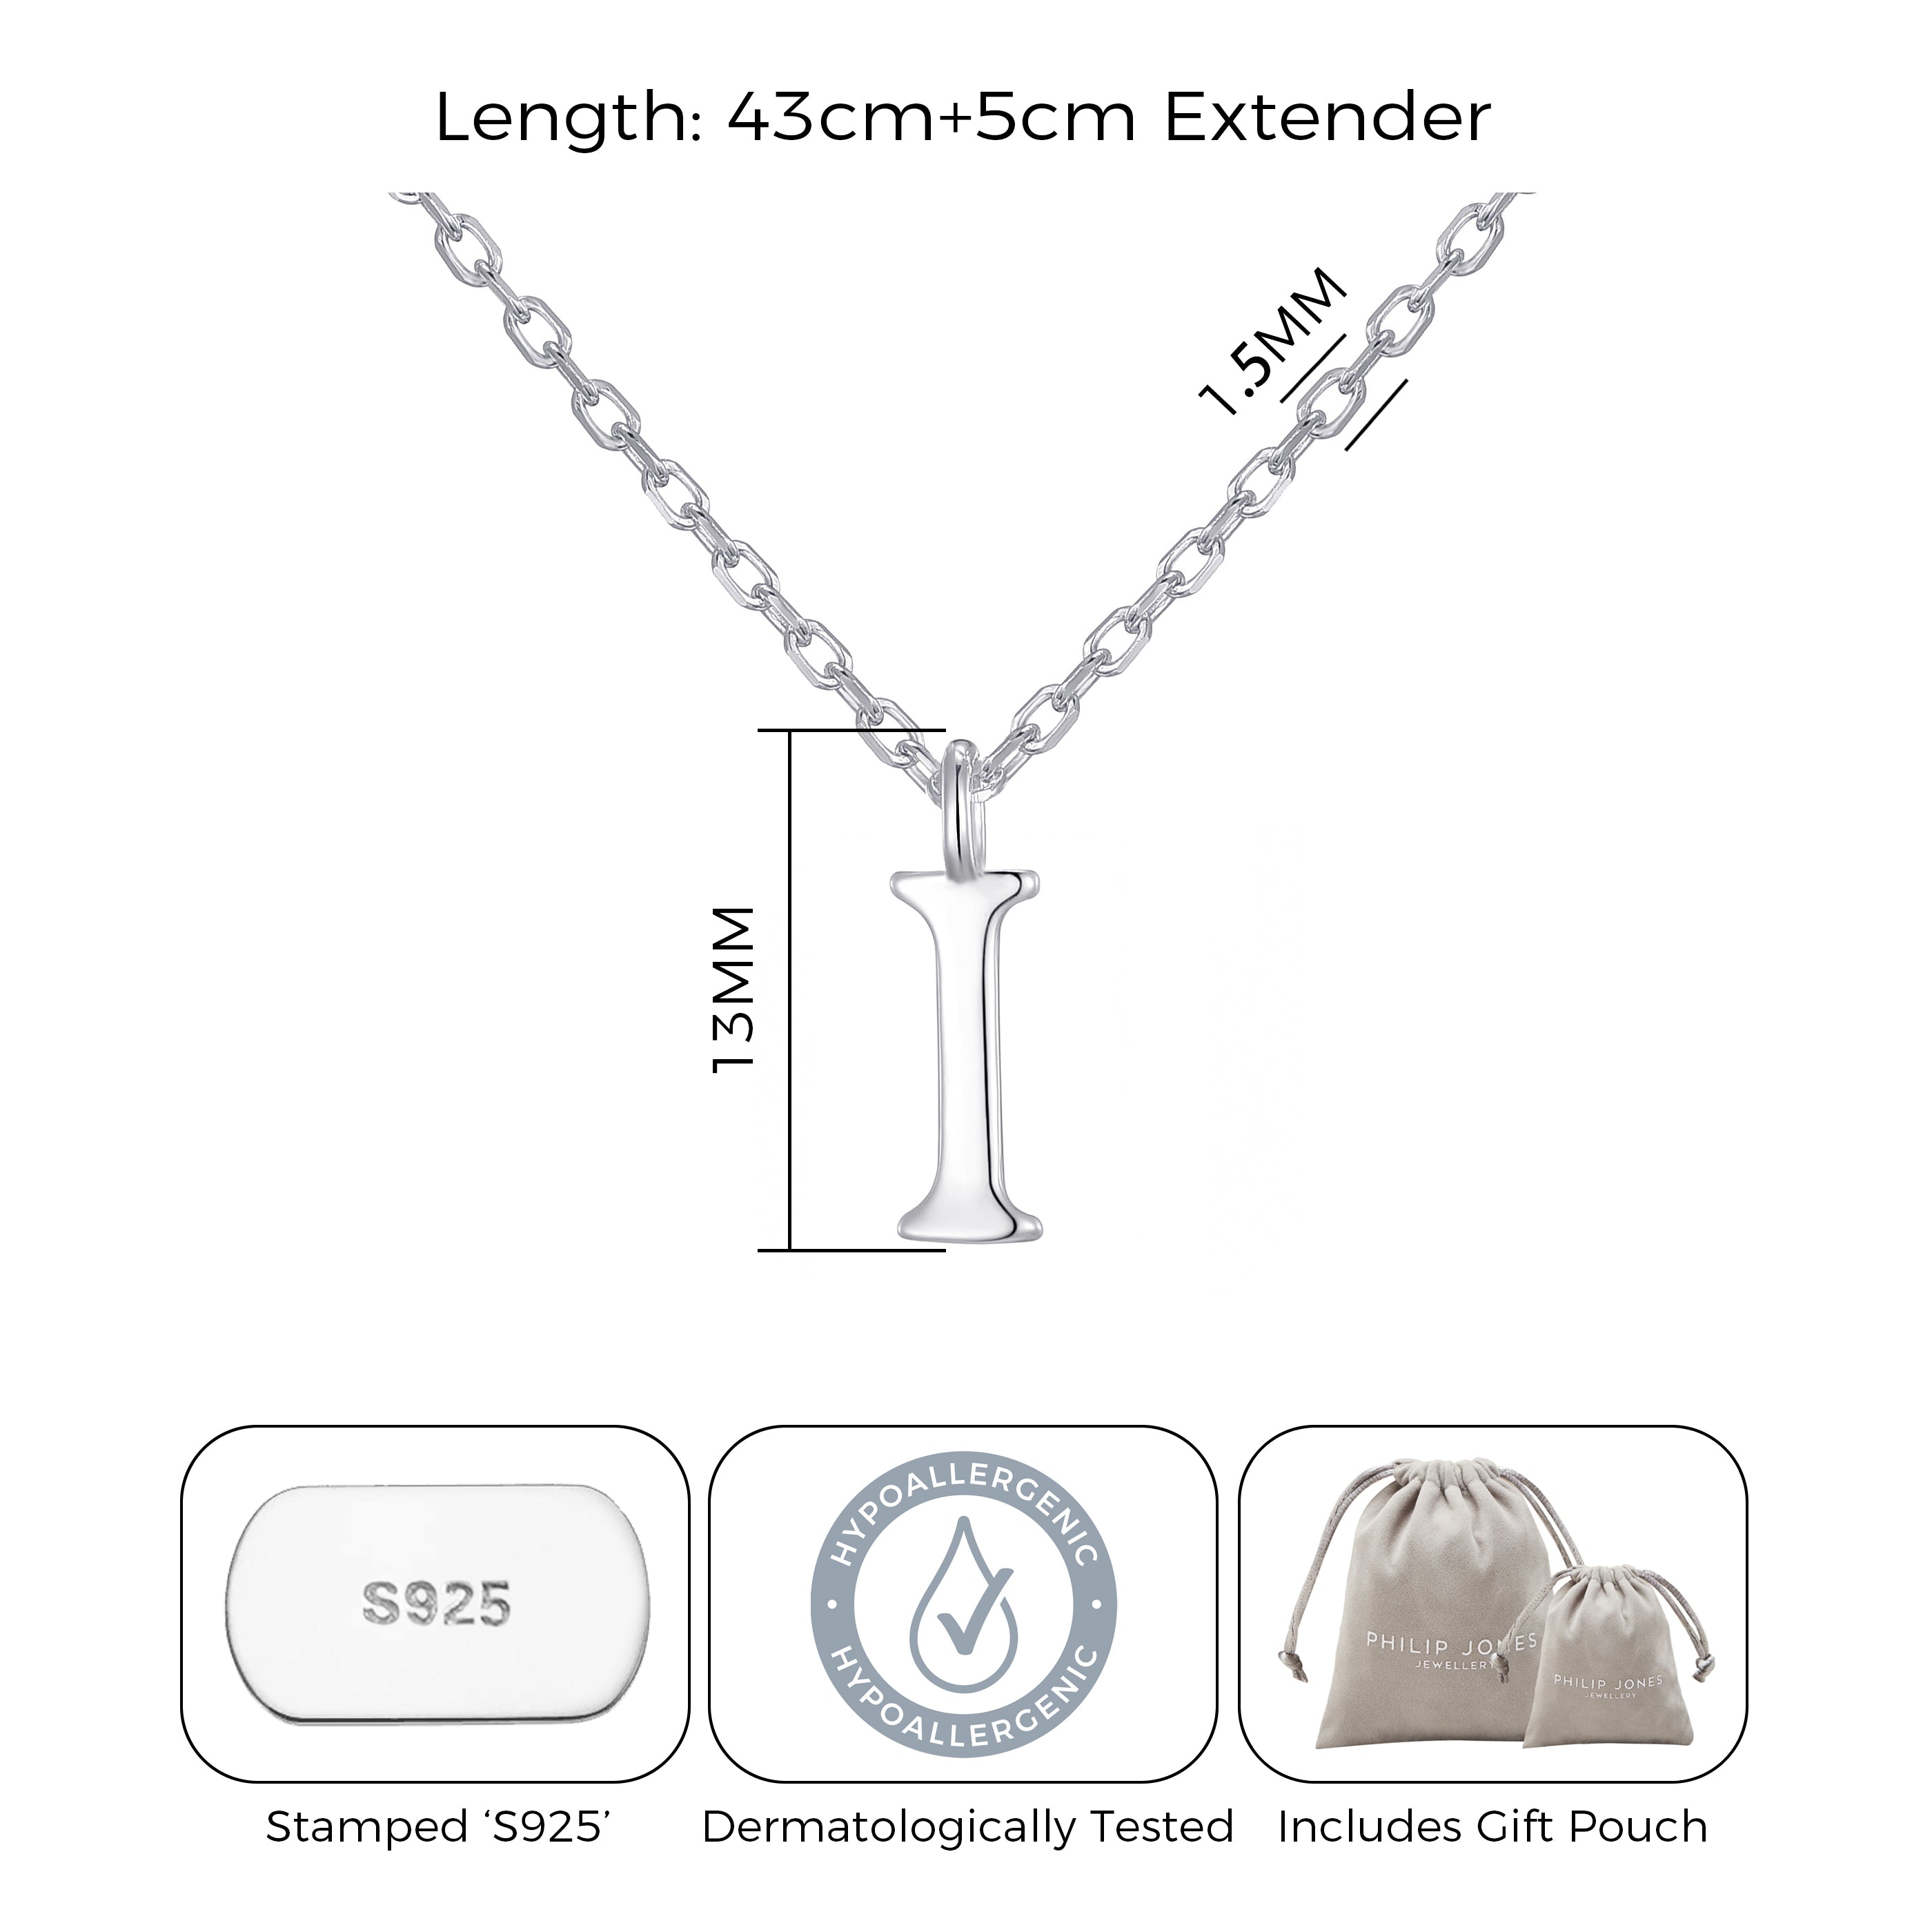 Sterling Silver Initial I Necklace